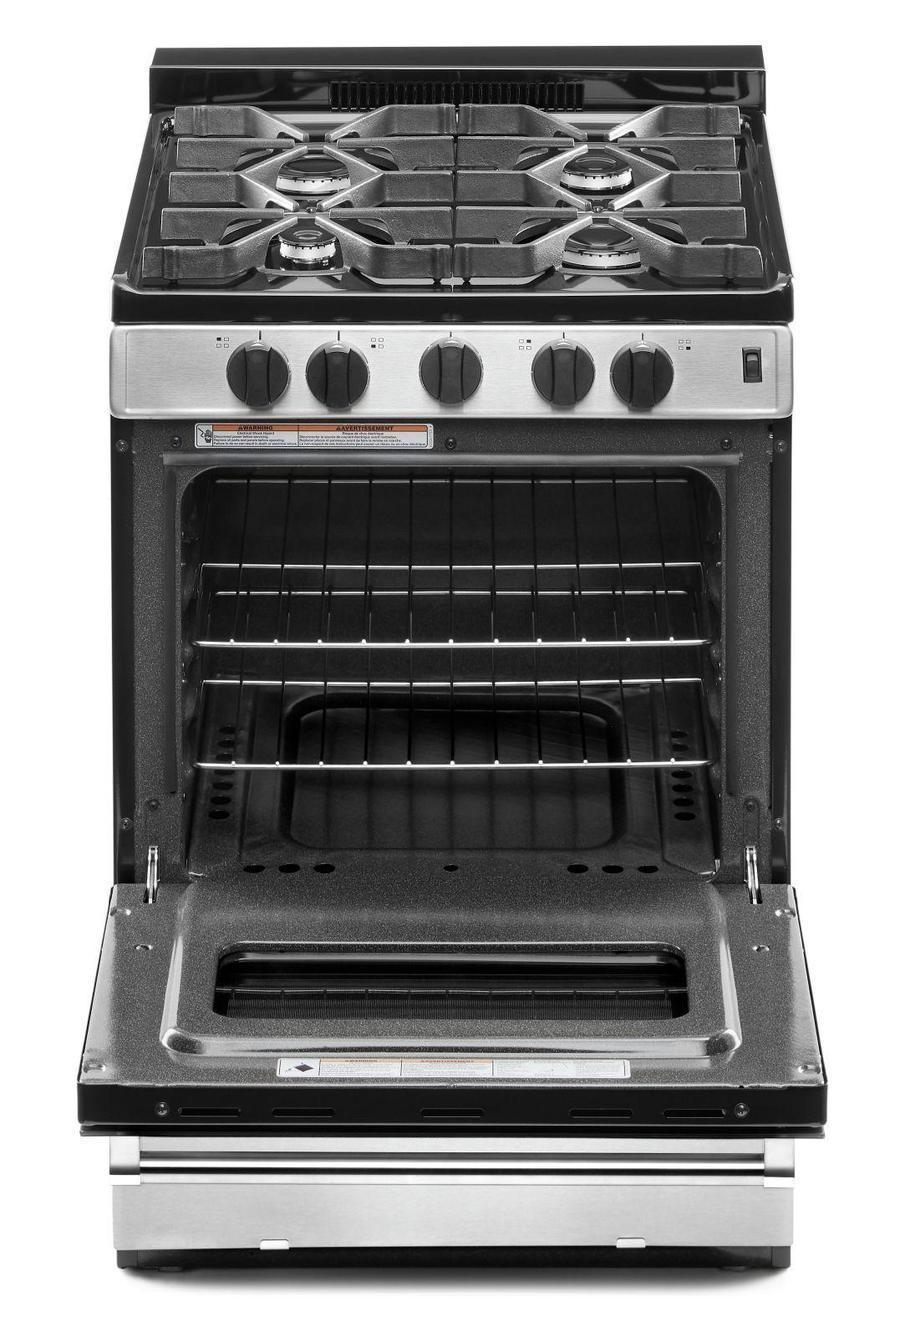 Whirlpool - 2.96 cu. ft  Gas Range in Stainless - WFG500M4HS